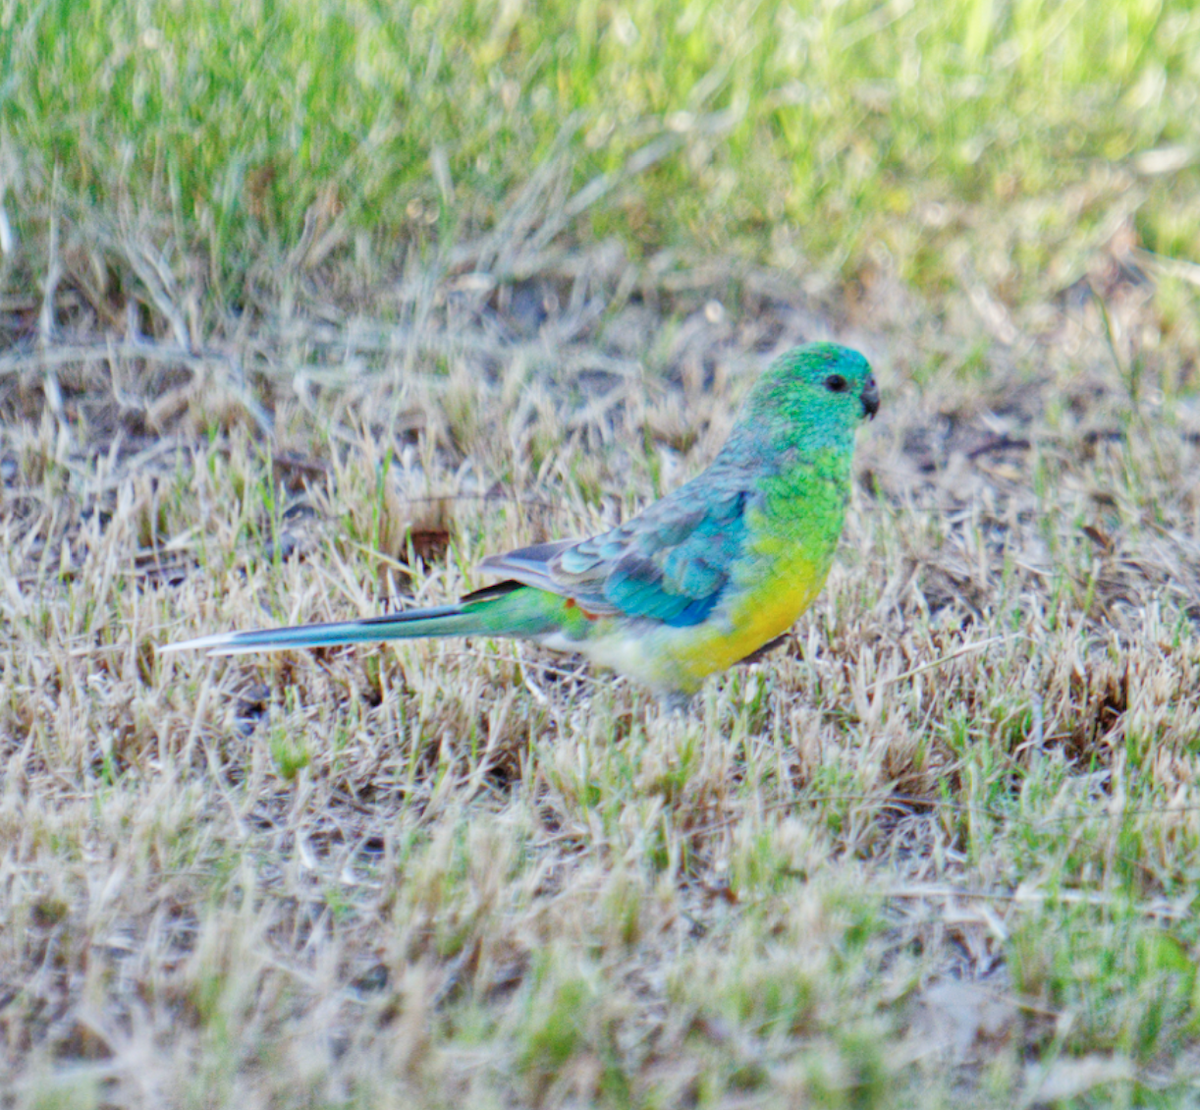 Red-rumped Parrot - Kevin Huang